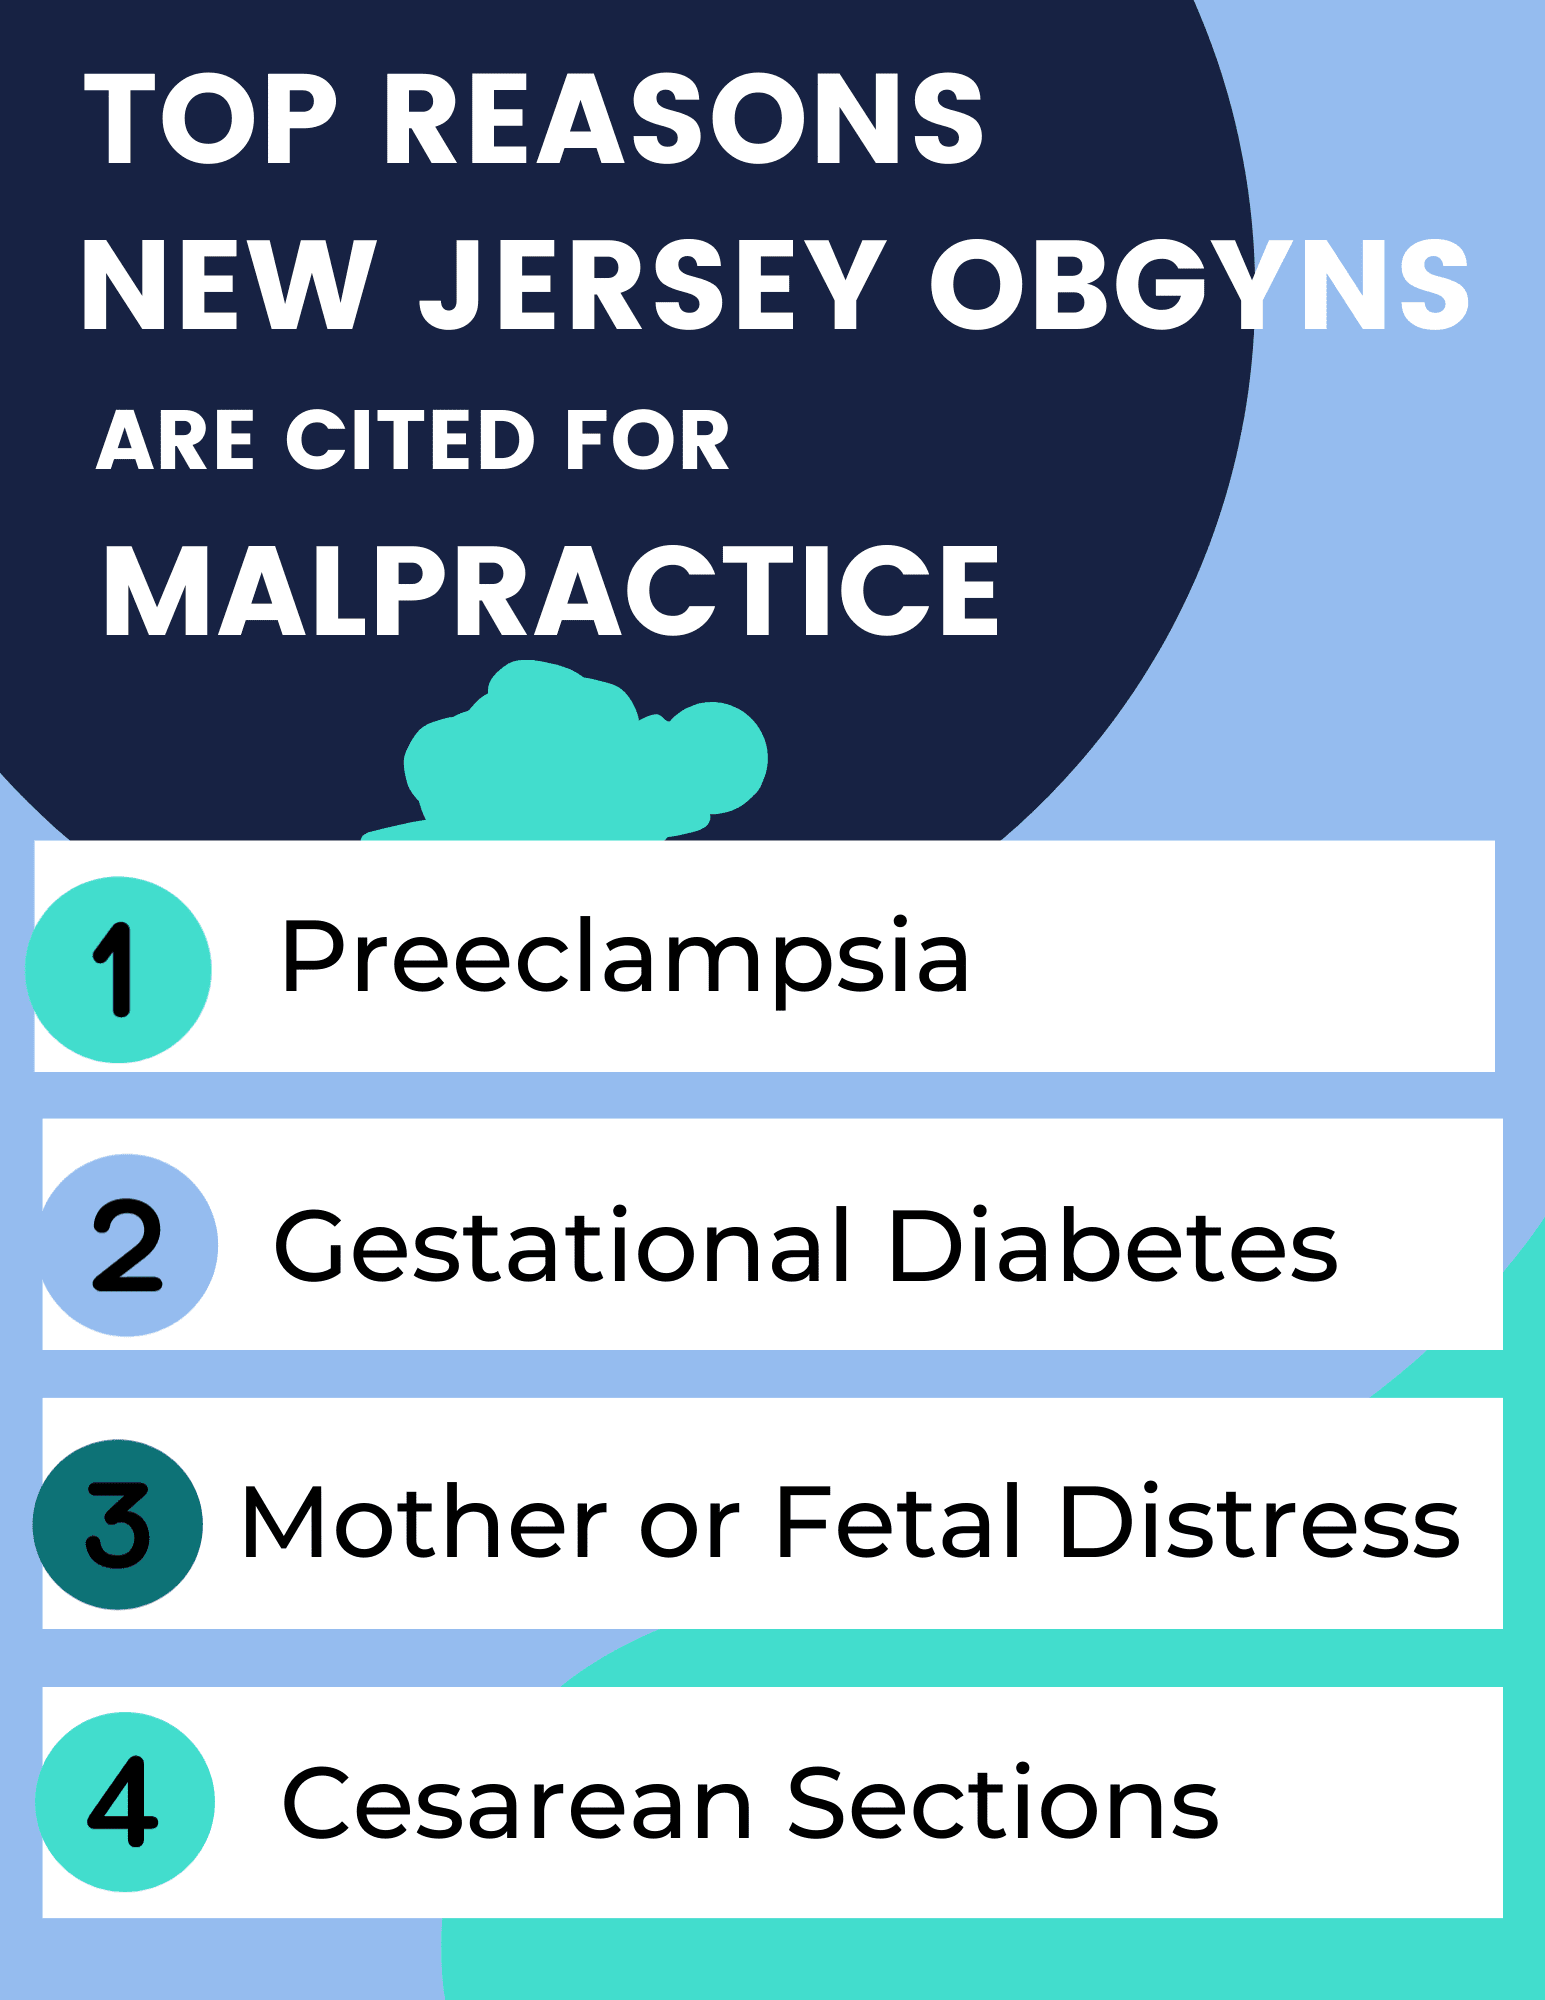 Top Reasons New Jersey OBGYNs Are Cited